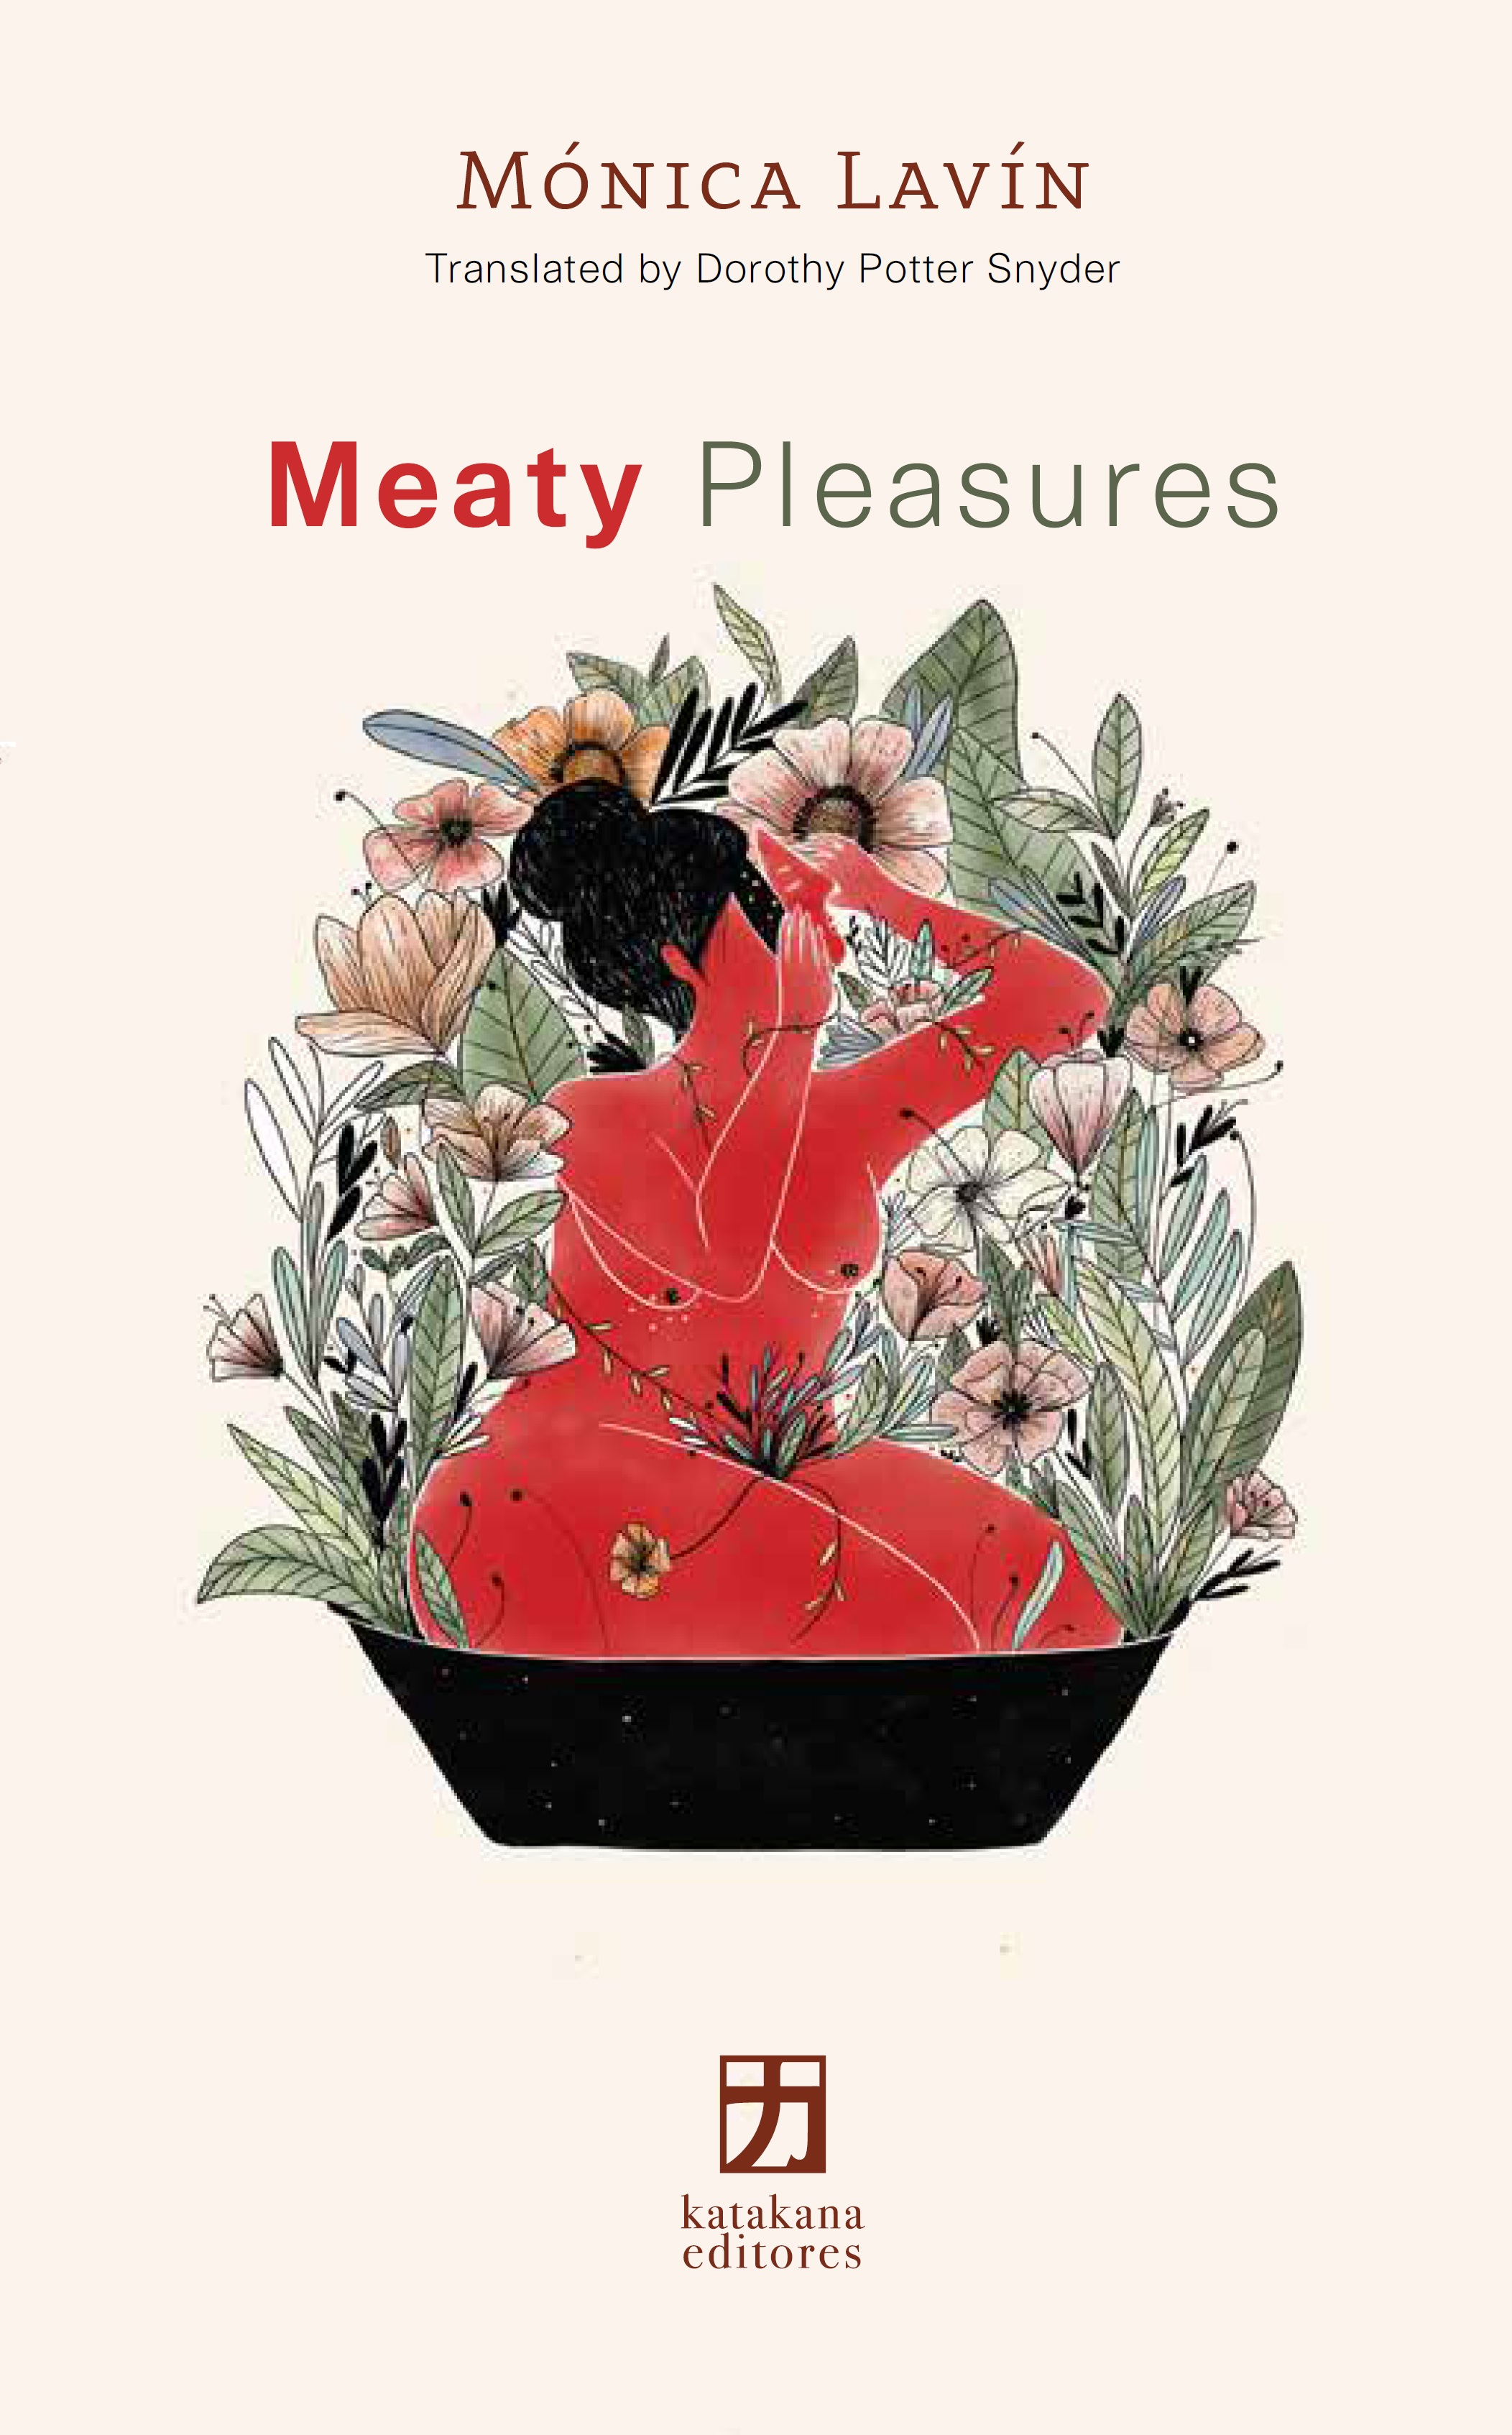 Cover of Meaty pleasures by Monica Lavin translated by D P Snyder published by Katakana